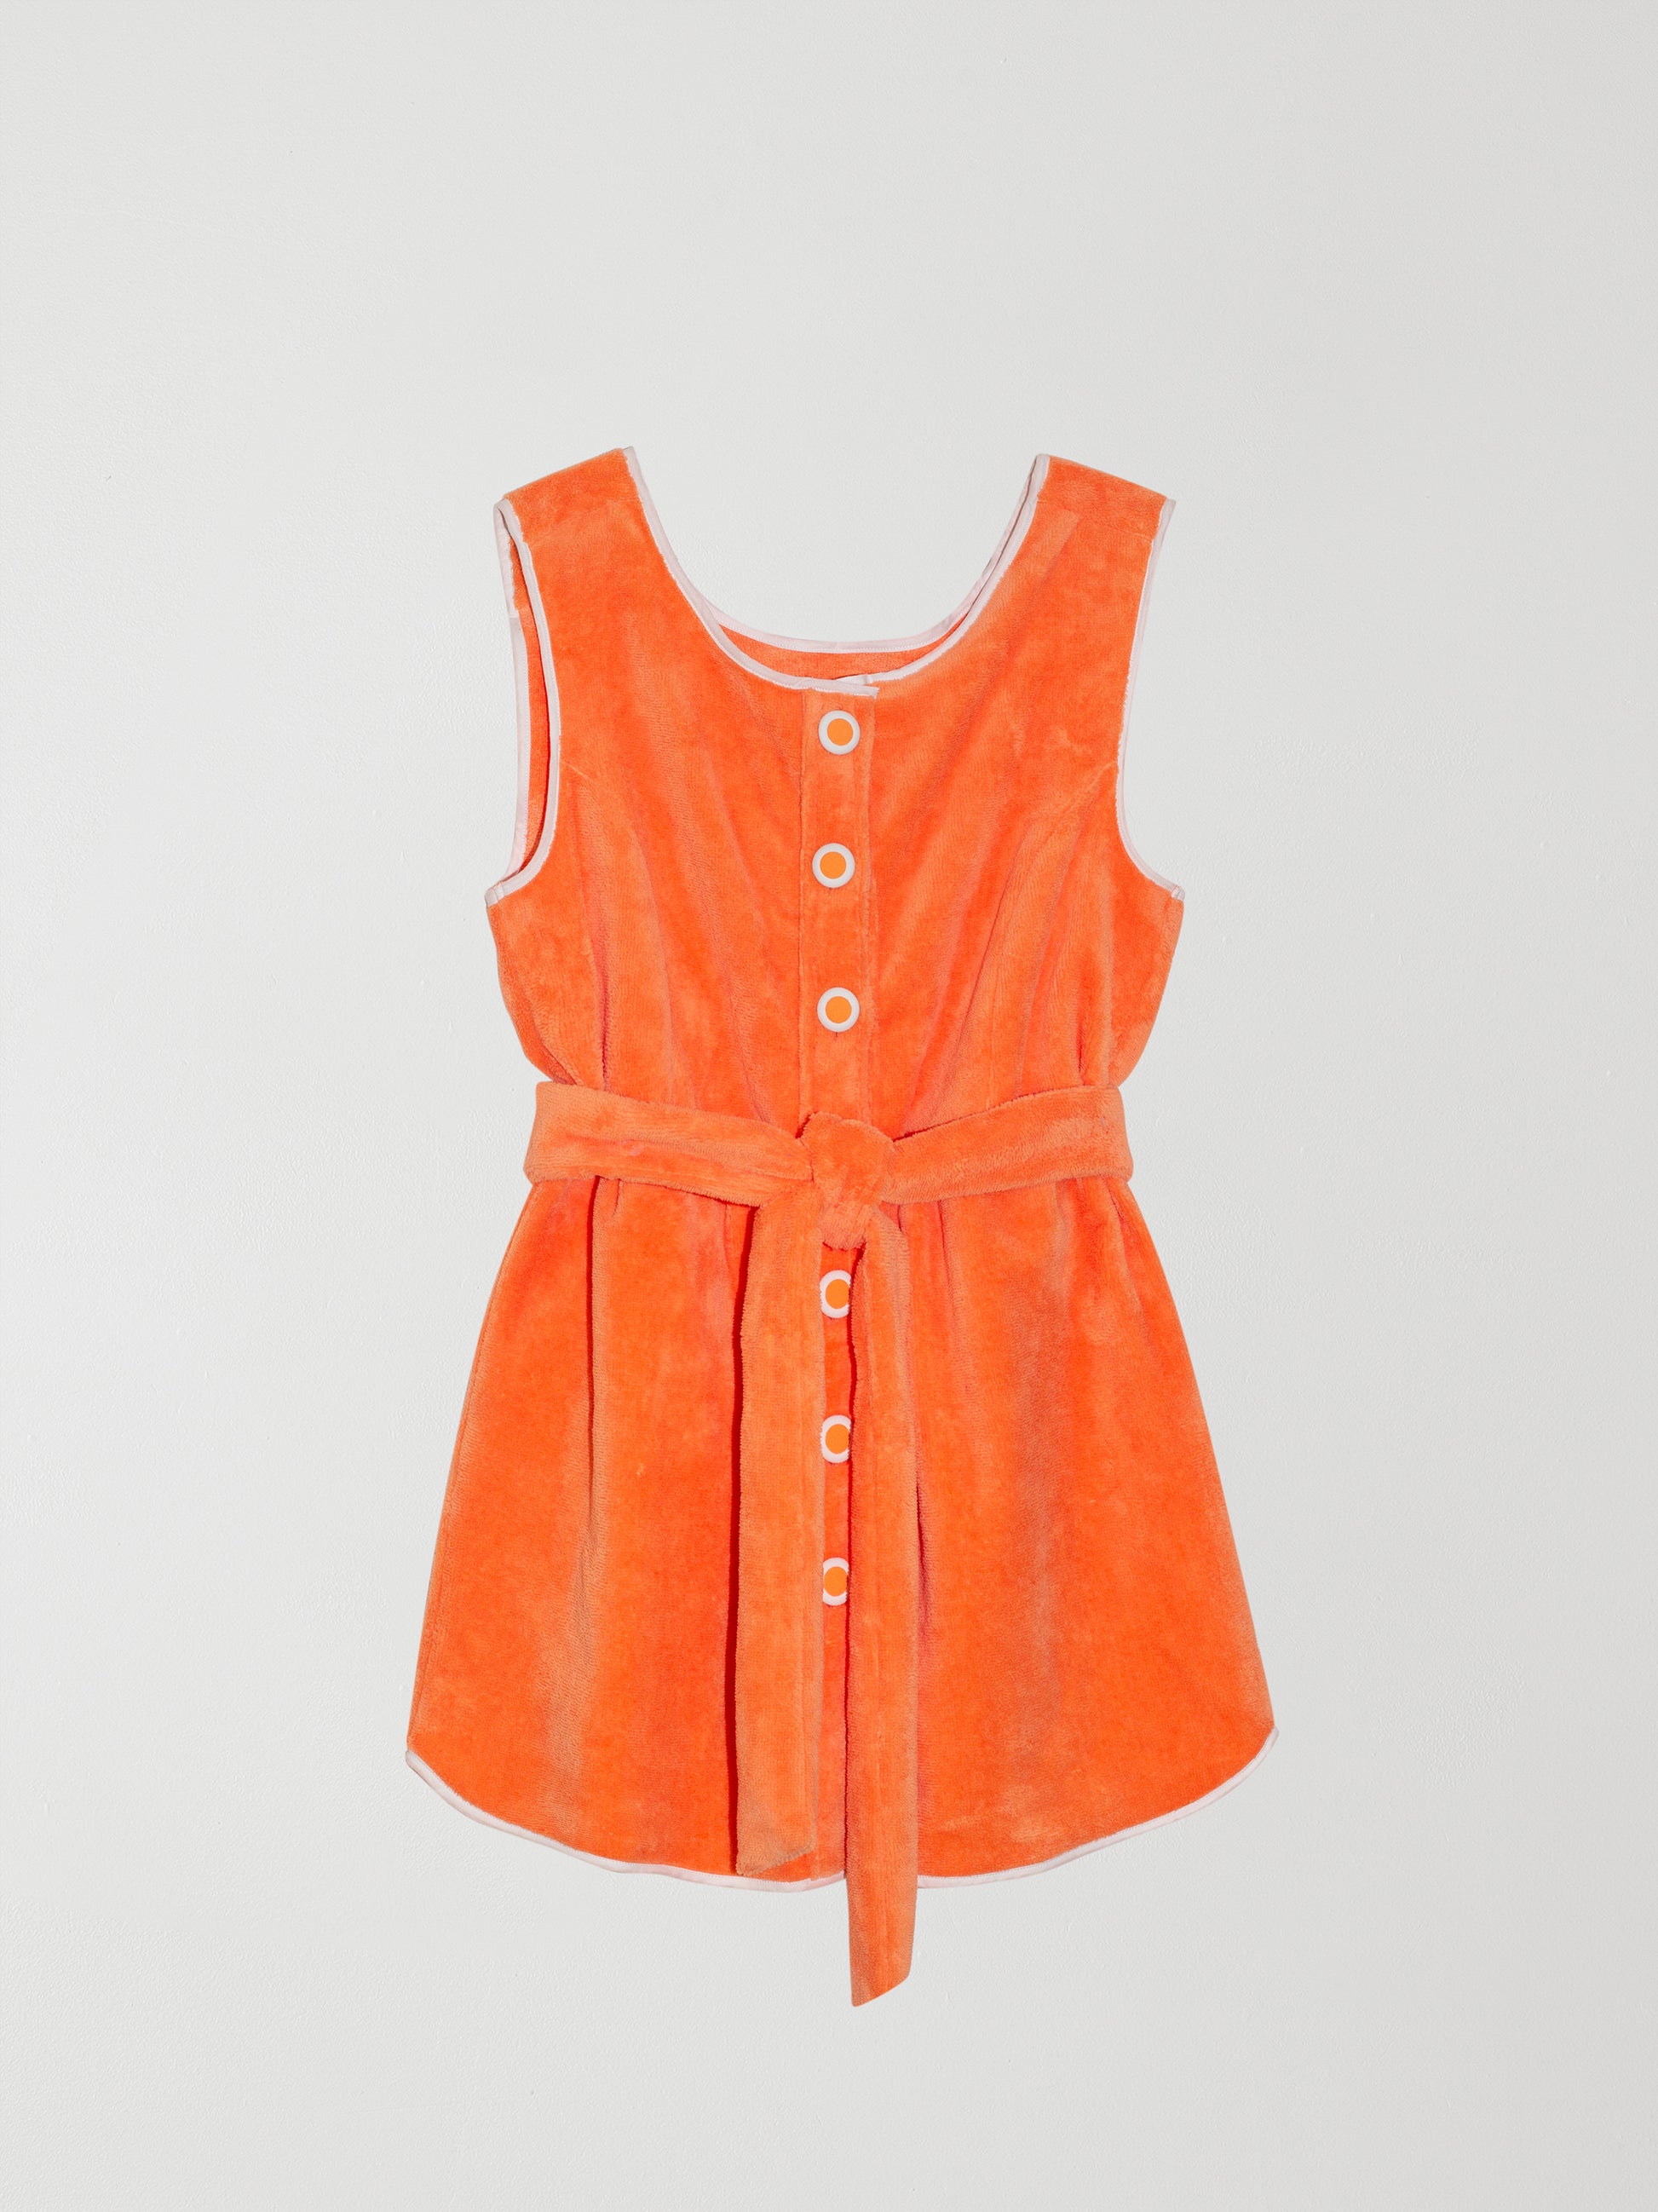 Colour: Orange.  Short towel dress made in orange cotton with white border and towel belt.   Regular fit. Short length. Sleeveless. Crew neck. Towel belt to tie at the waist.  Front fastening with white edged buttons.